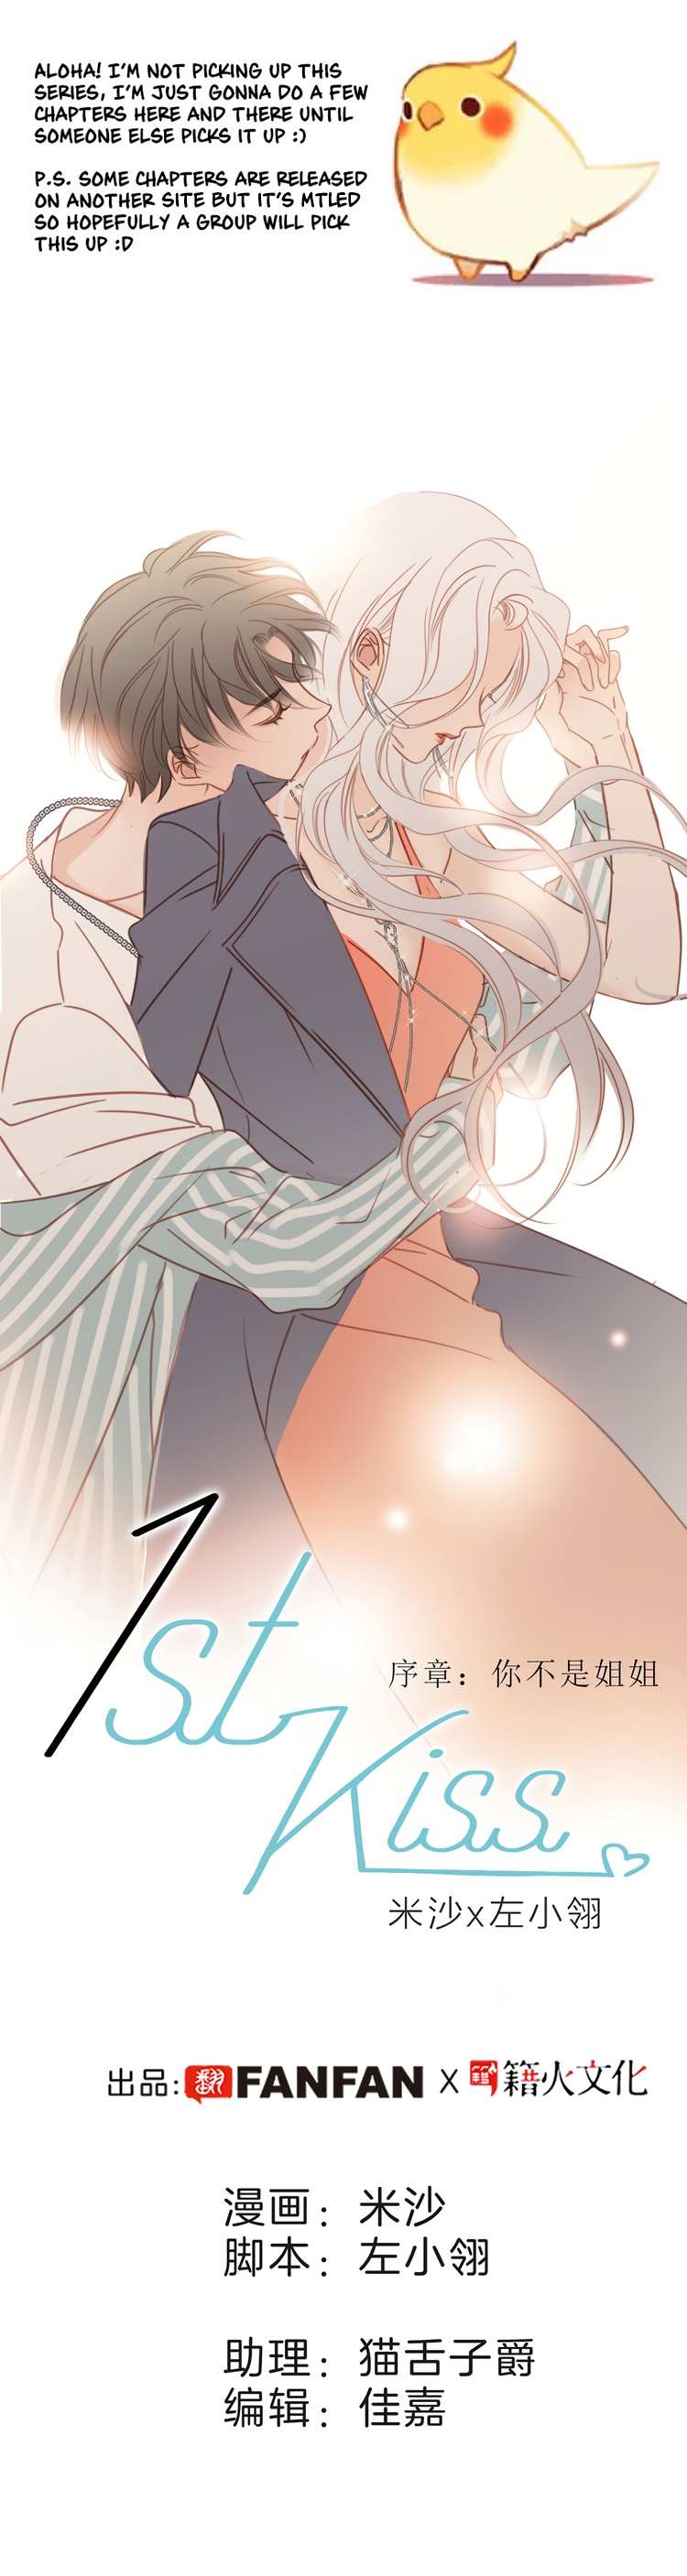 1St Kiss - chapter 0 - #2